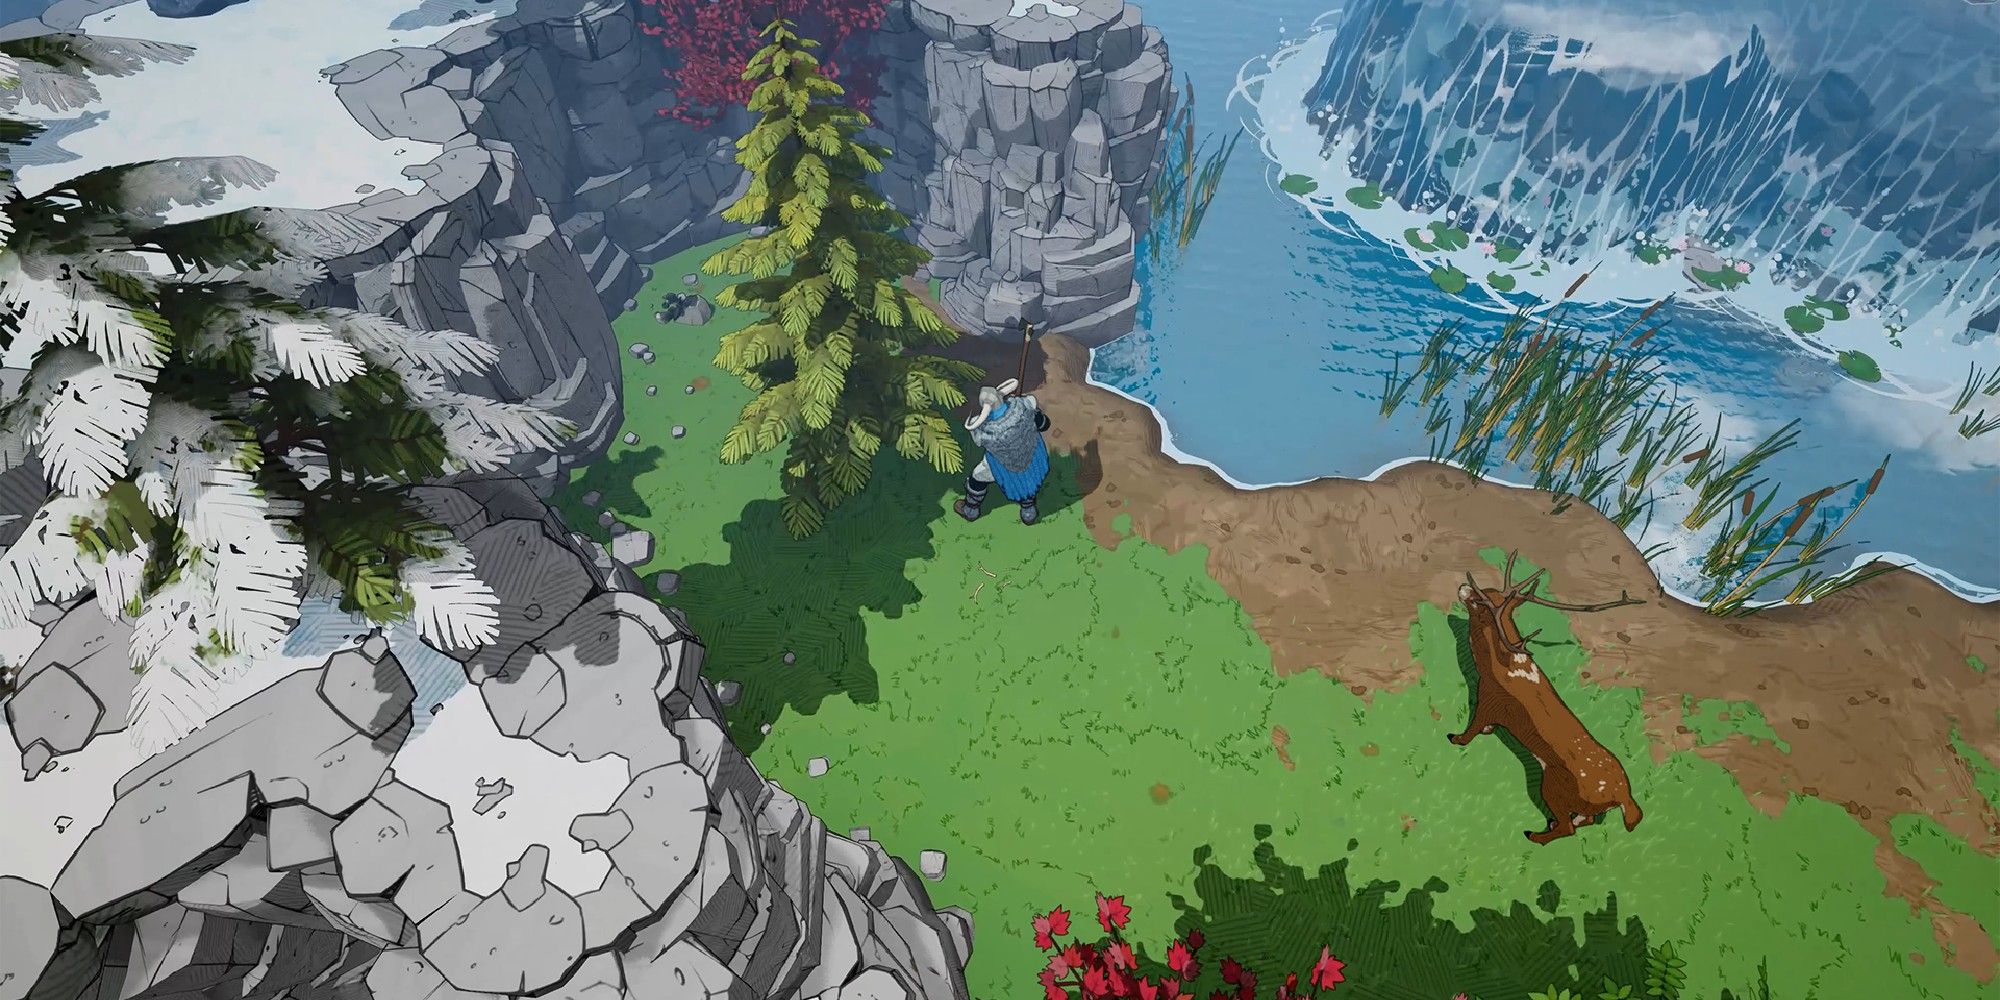 Tribes of Midgard grassy area by cliff and river with waterfall